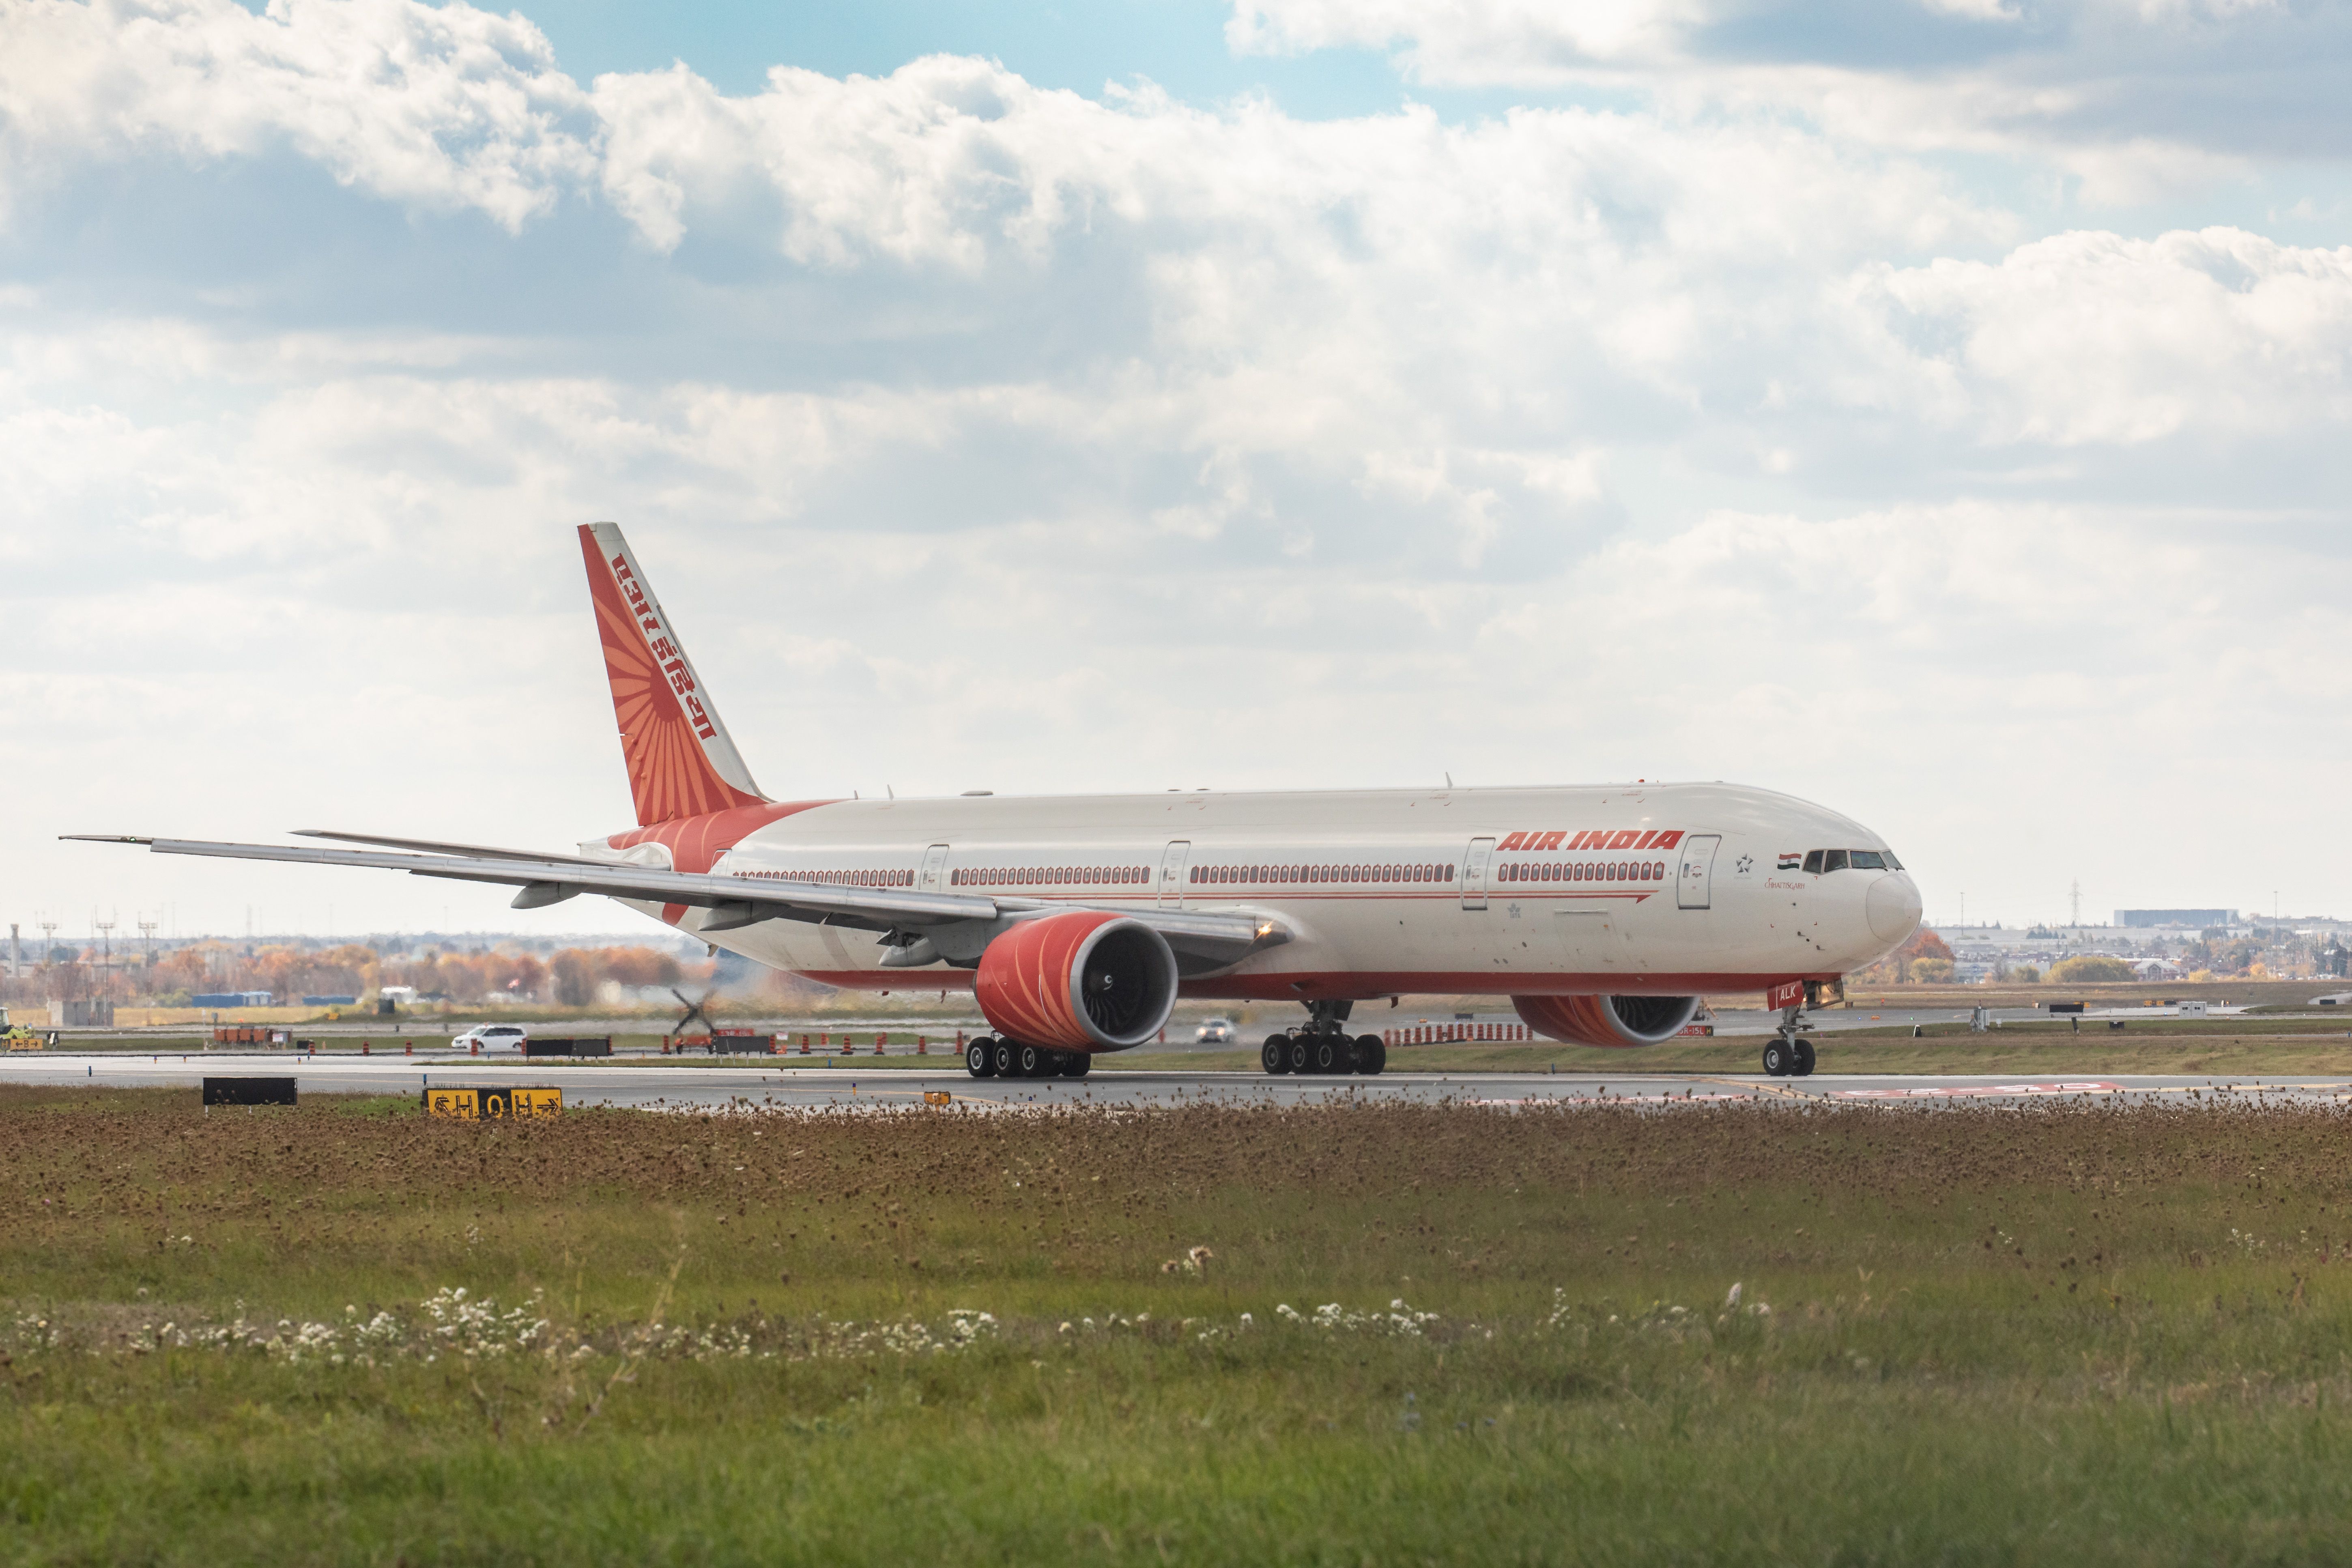 Air India Boeing 777 at Toronto Pearson International Airport YYZ shutterstock_1835843680